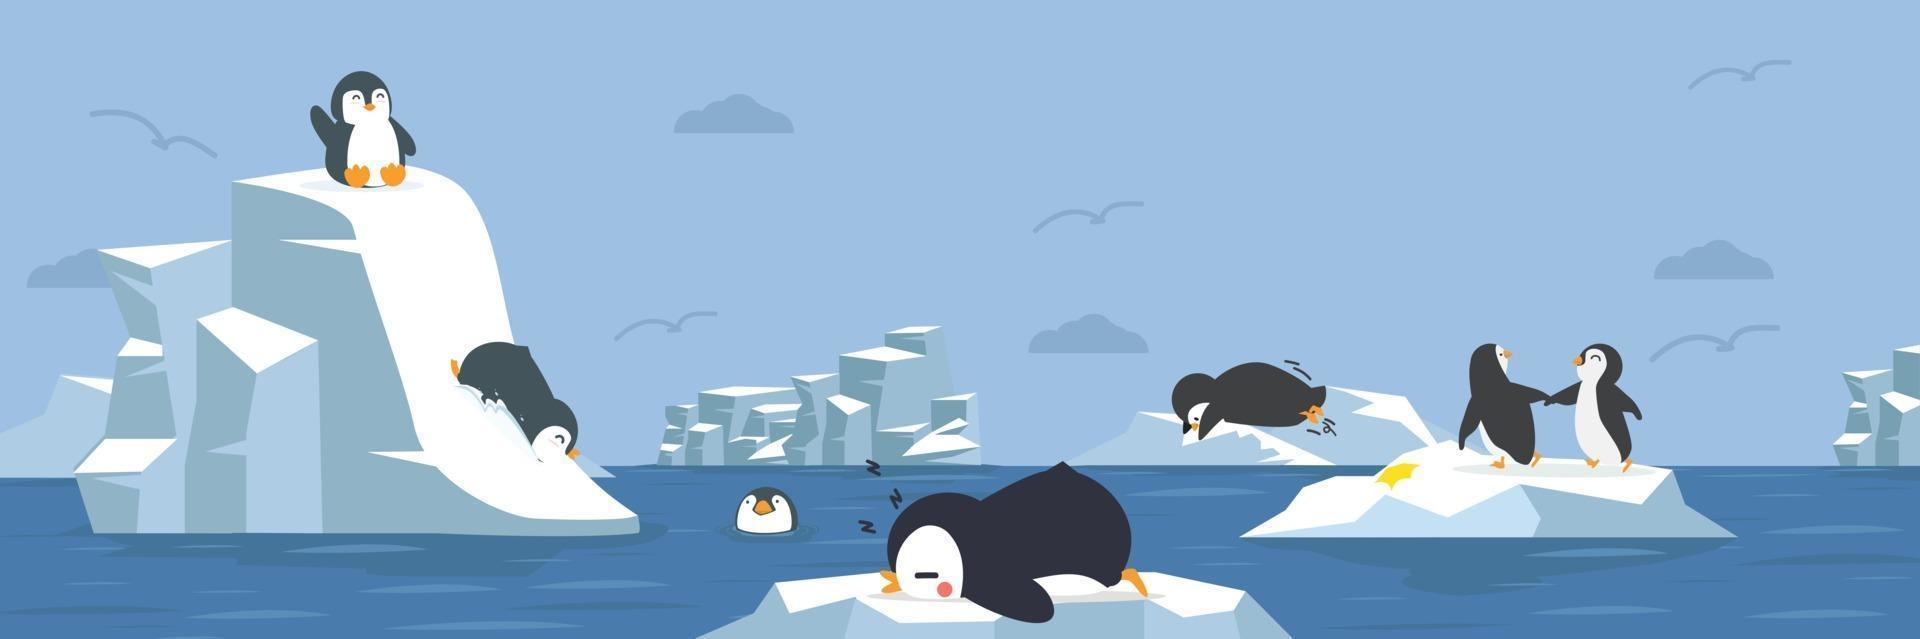 Penguins animals with arctic background vector